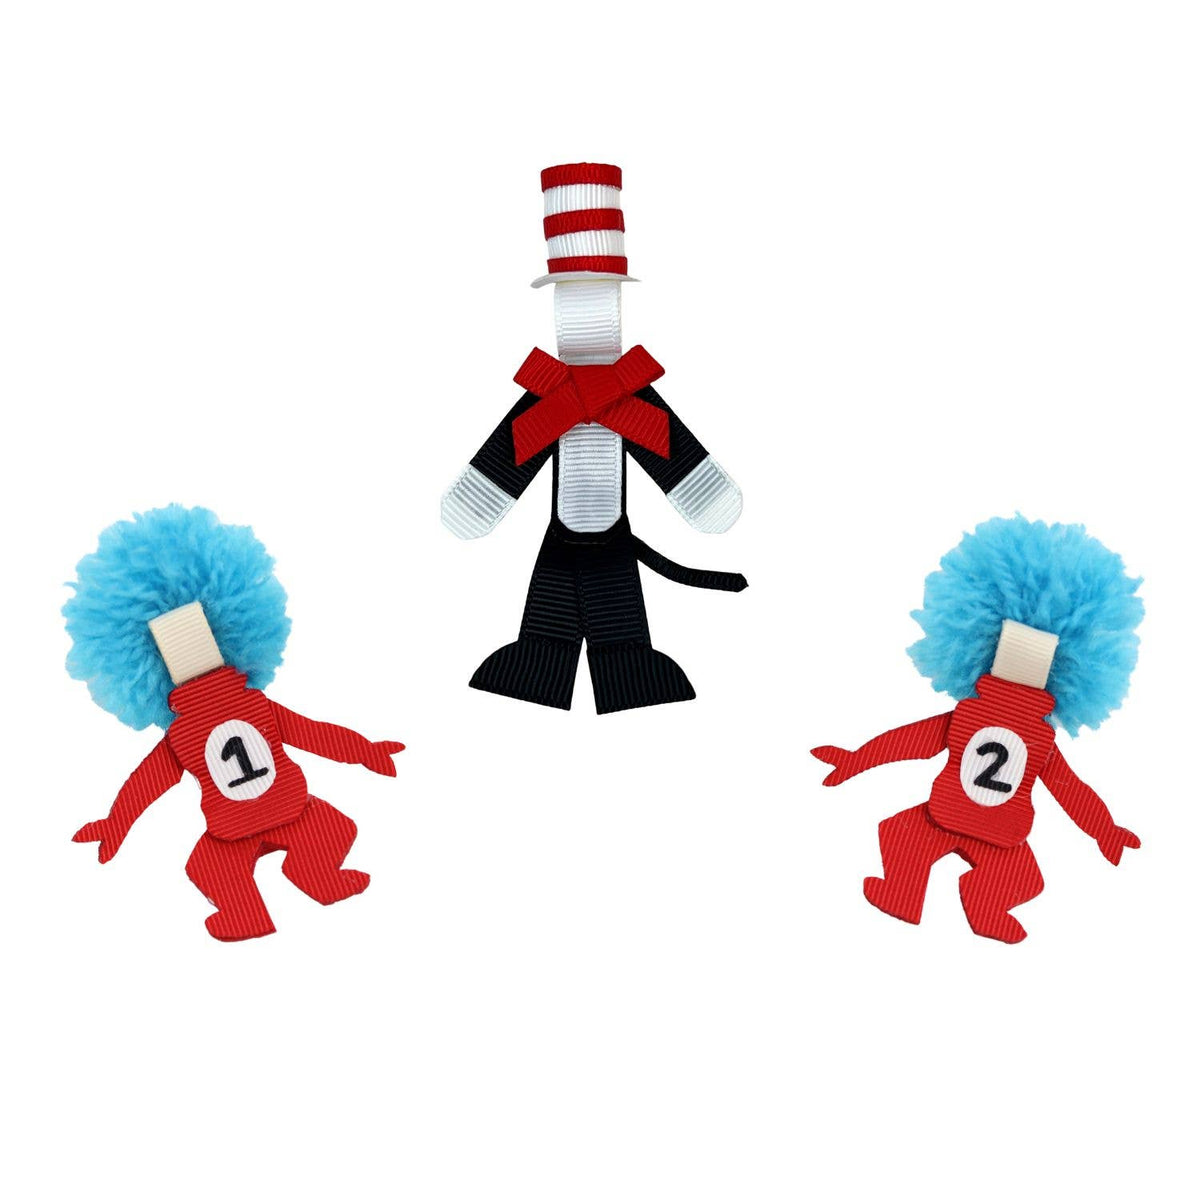 Cat in Hat Figures: Thing 1